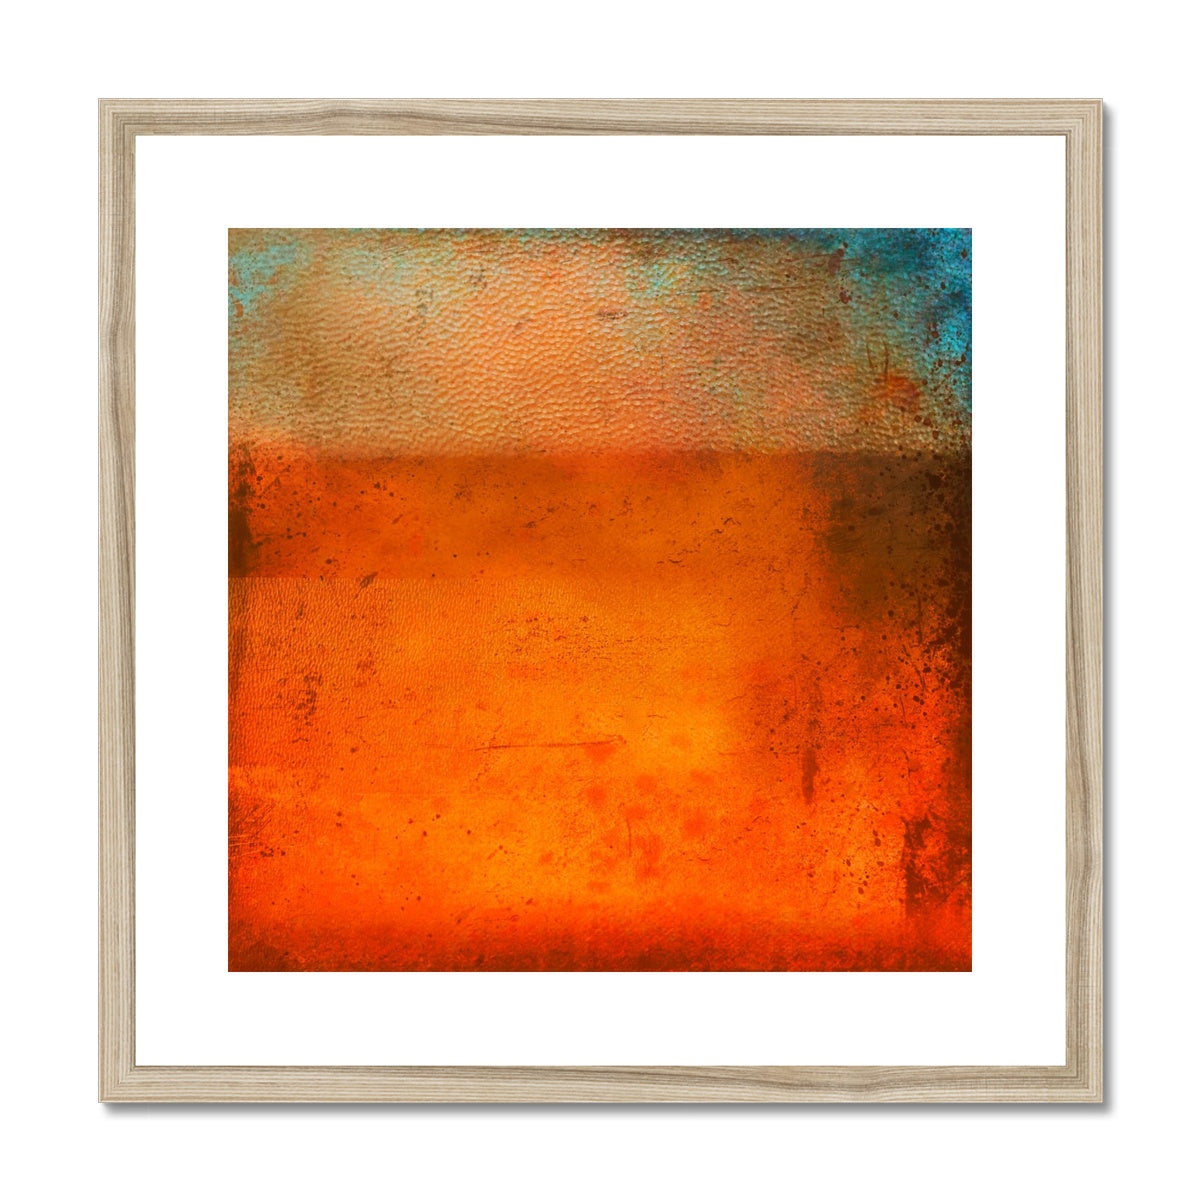 Sunset Horizon Abstract Painting | Framed & Mounted Prints From Scotland-Framed & Mounted Prints-Abstract & Impressionistic Art Gallery-20"x20"-Natural Frame-Paintings, Prints, Homeware, Art Gifts From Scotland By Scottish Artist Kevin Hunter